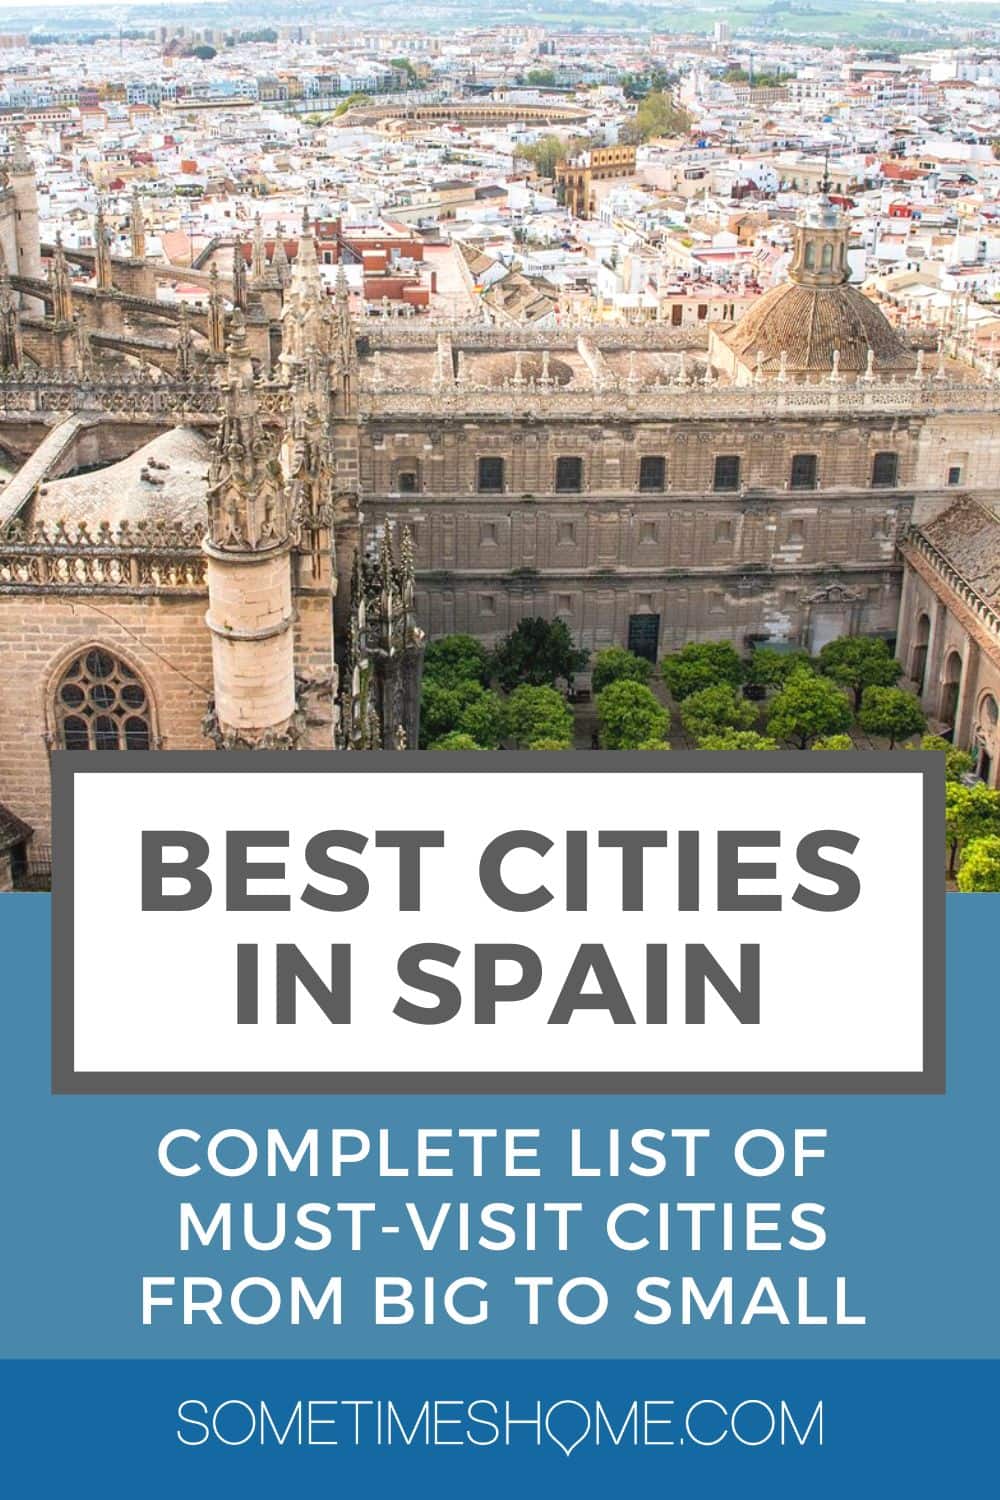 Best cities in Spain: Complete list of must-visit cities from big to small with an aerial view of Seville.